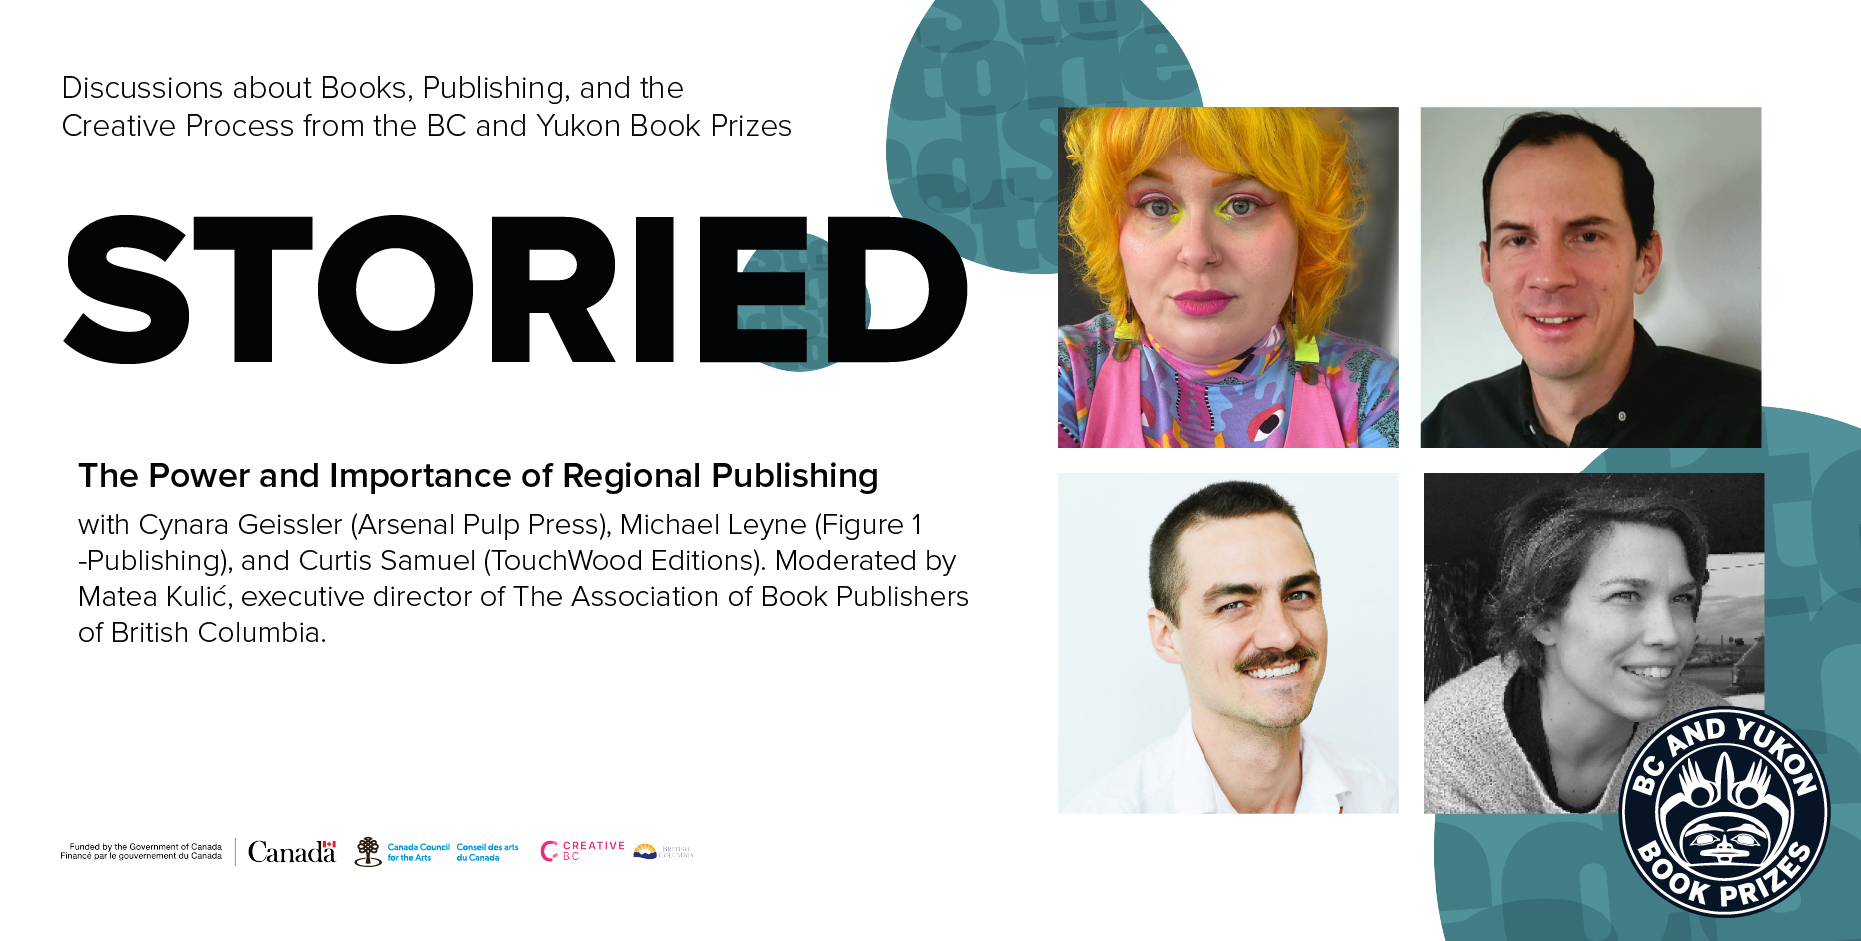 Storied: The Power and Importance of Regional Publishing with Cynara Geissler, Michael Leyne, and Curtis Samuel. Hosted by Matea Kulić